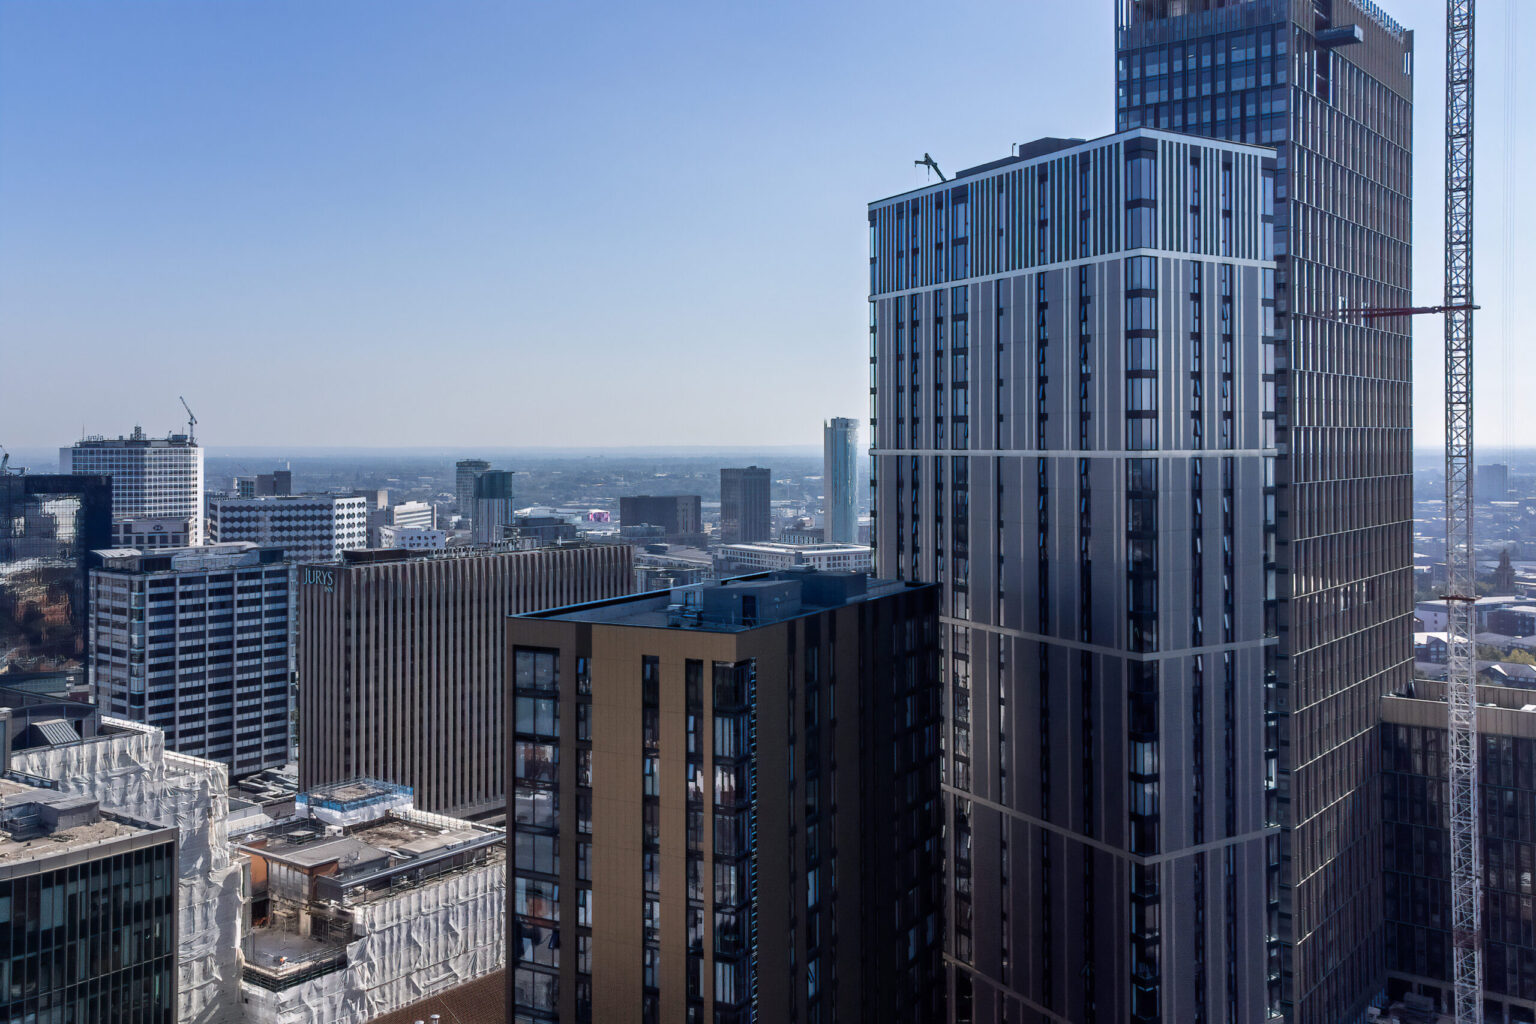 View of Birmingham city centre skyline with The Bank towers, for which KWB Residential provides comprehensive block management in Birmingham